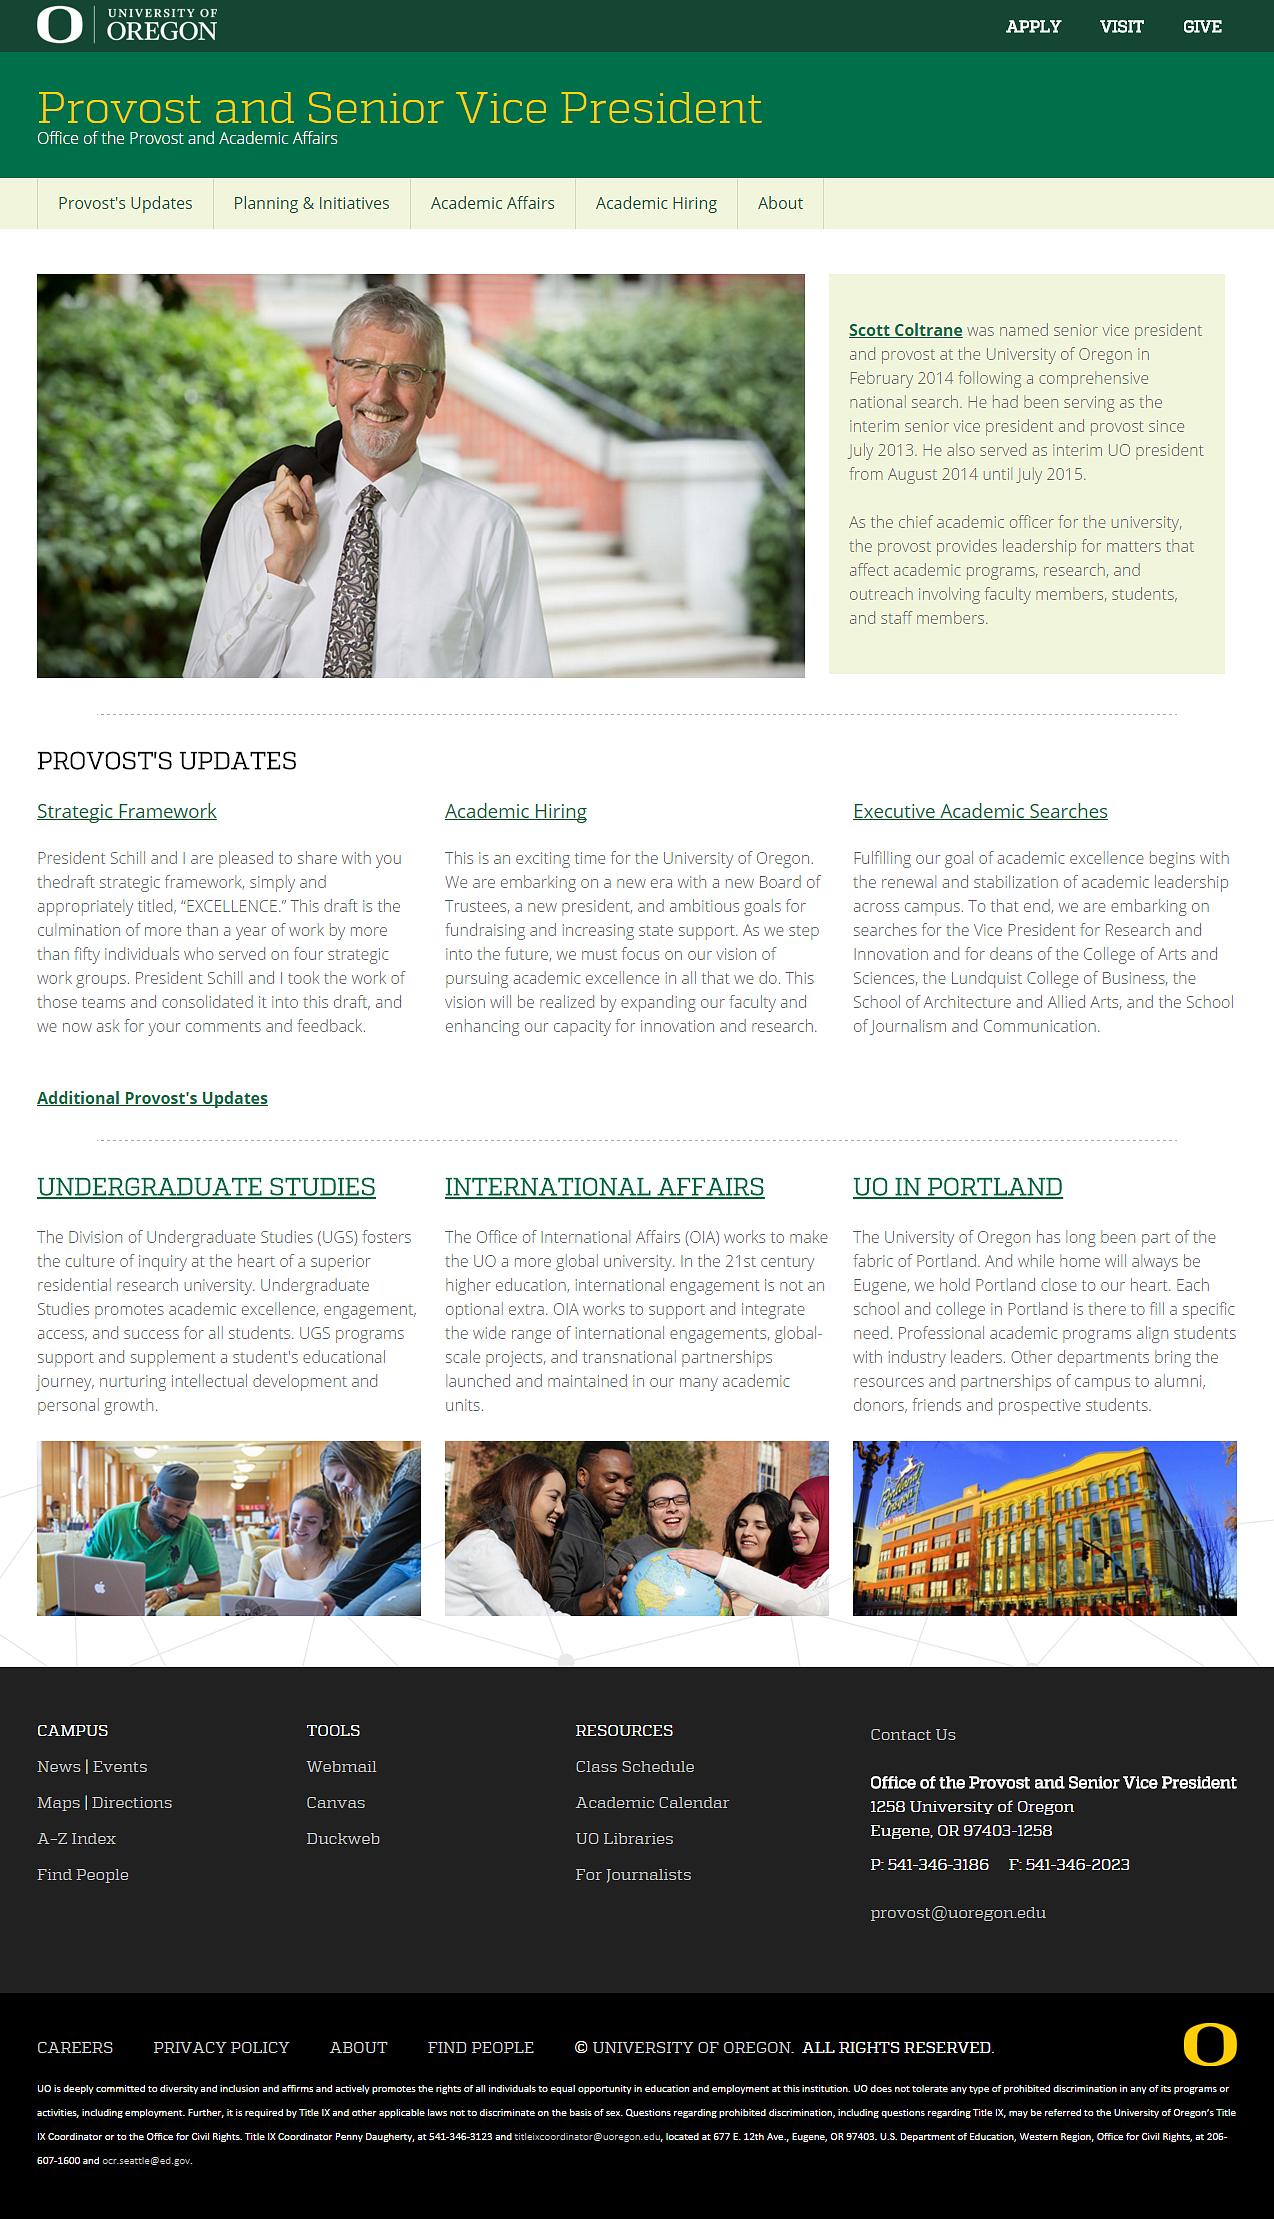 Screenshot of the Provost homepage